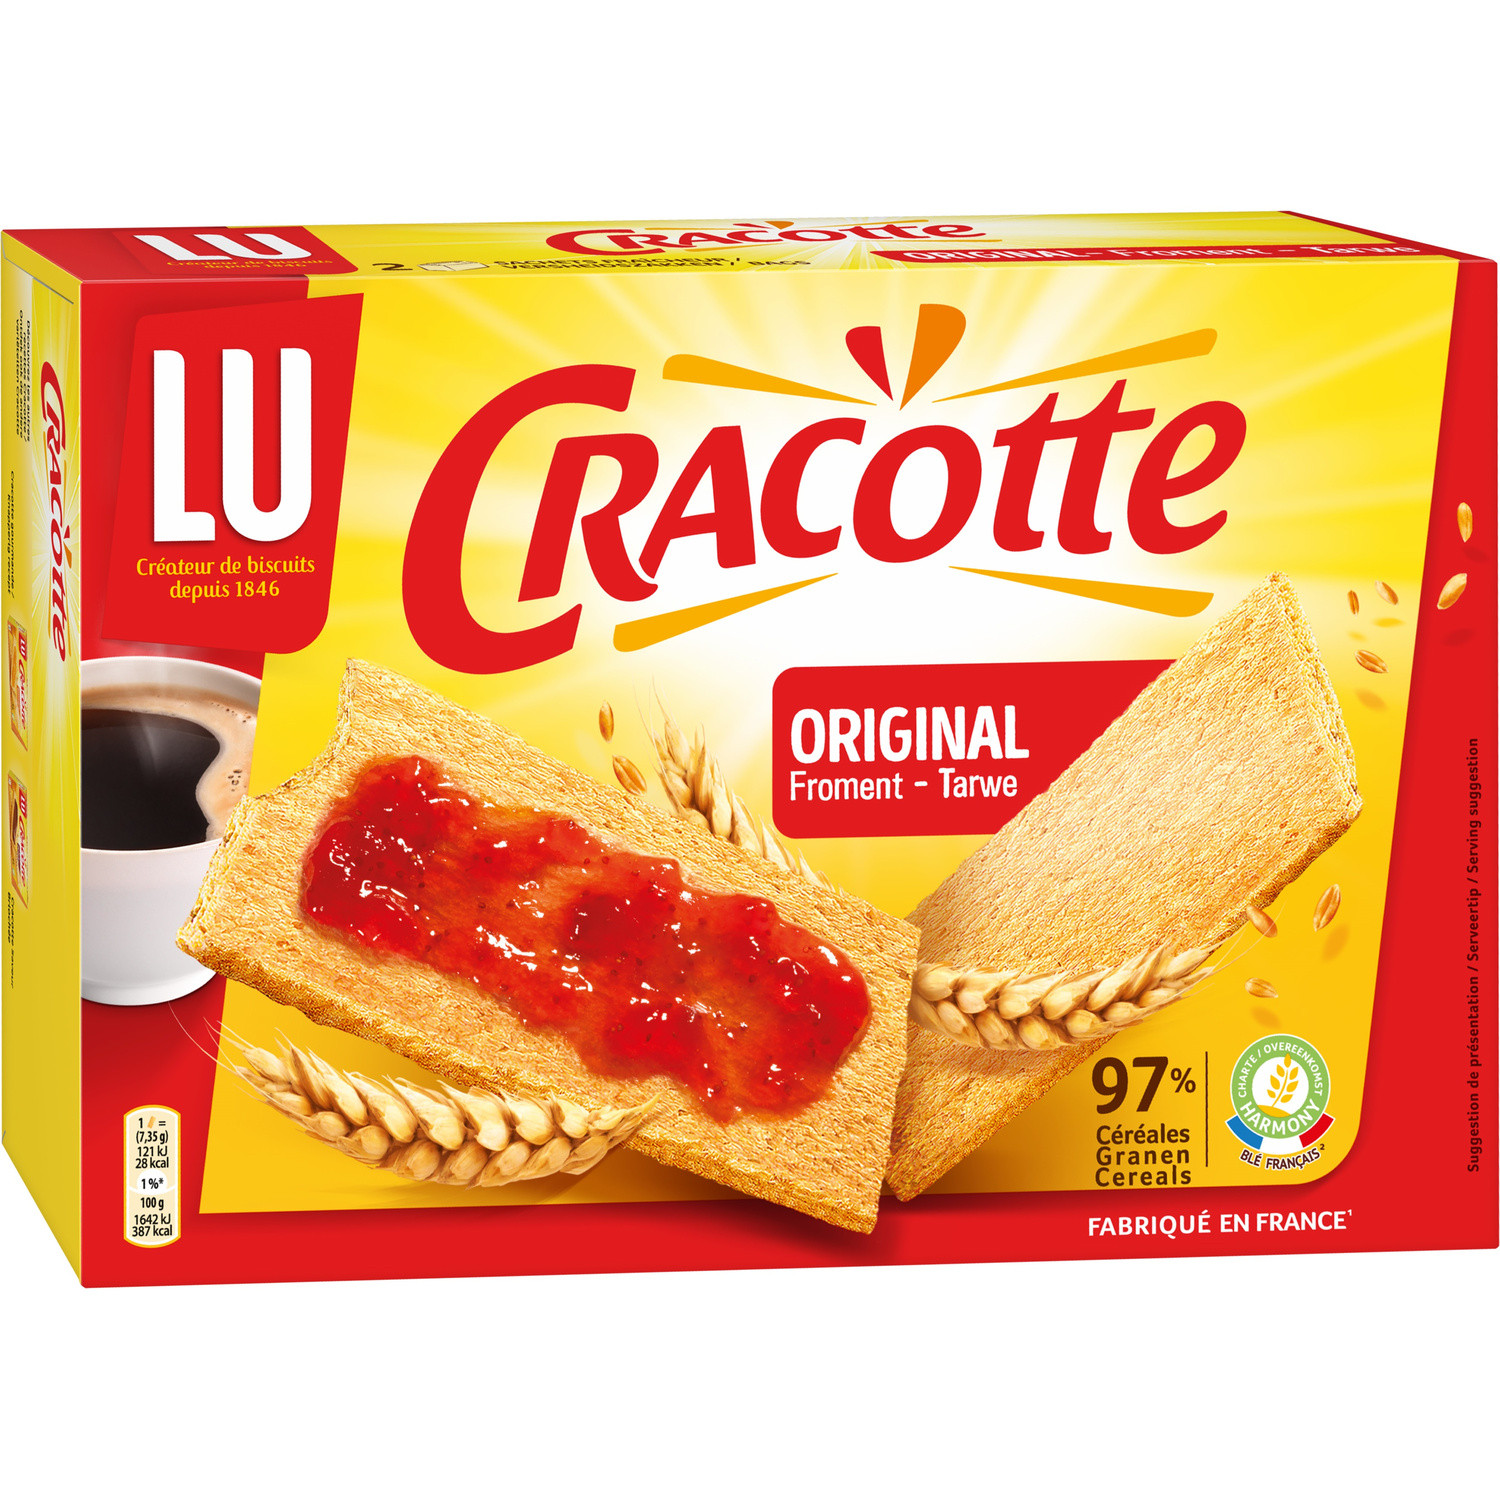 https://my-french-grocery.com/wp-content/uploads/2021/07/CRACOTTES-LU-ORIGINAL.jpg